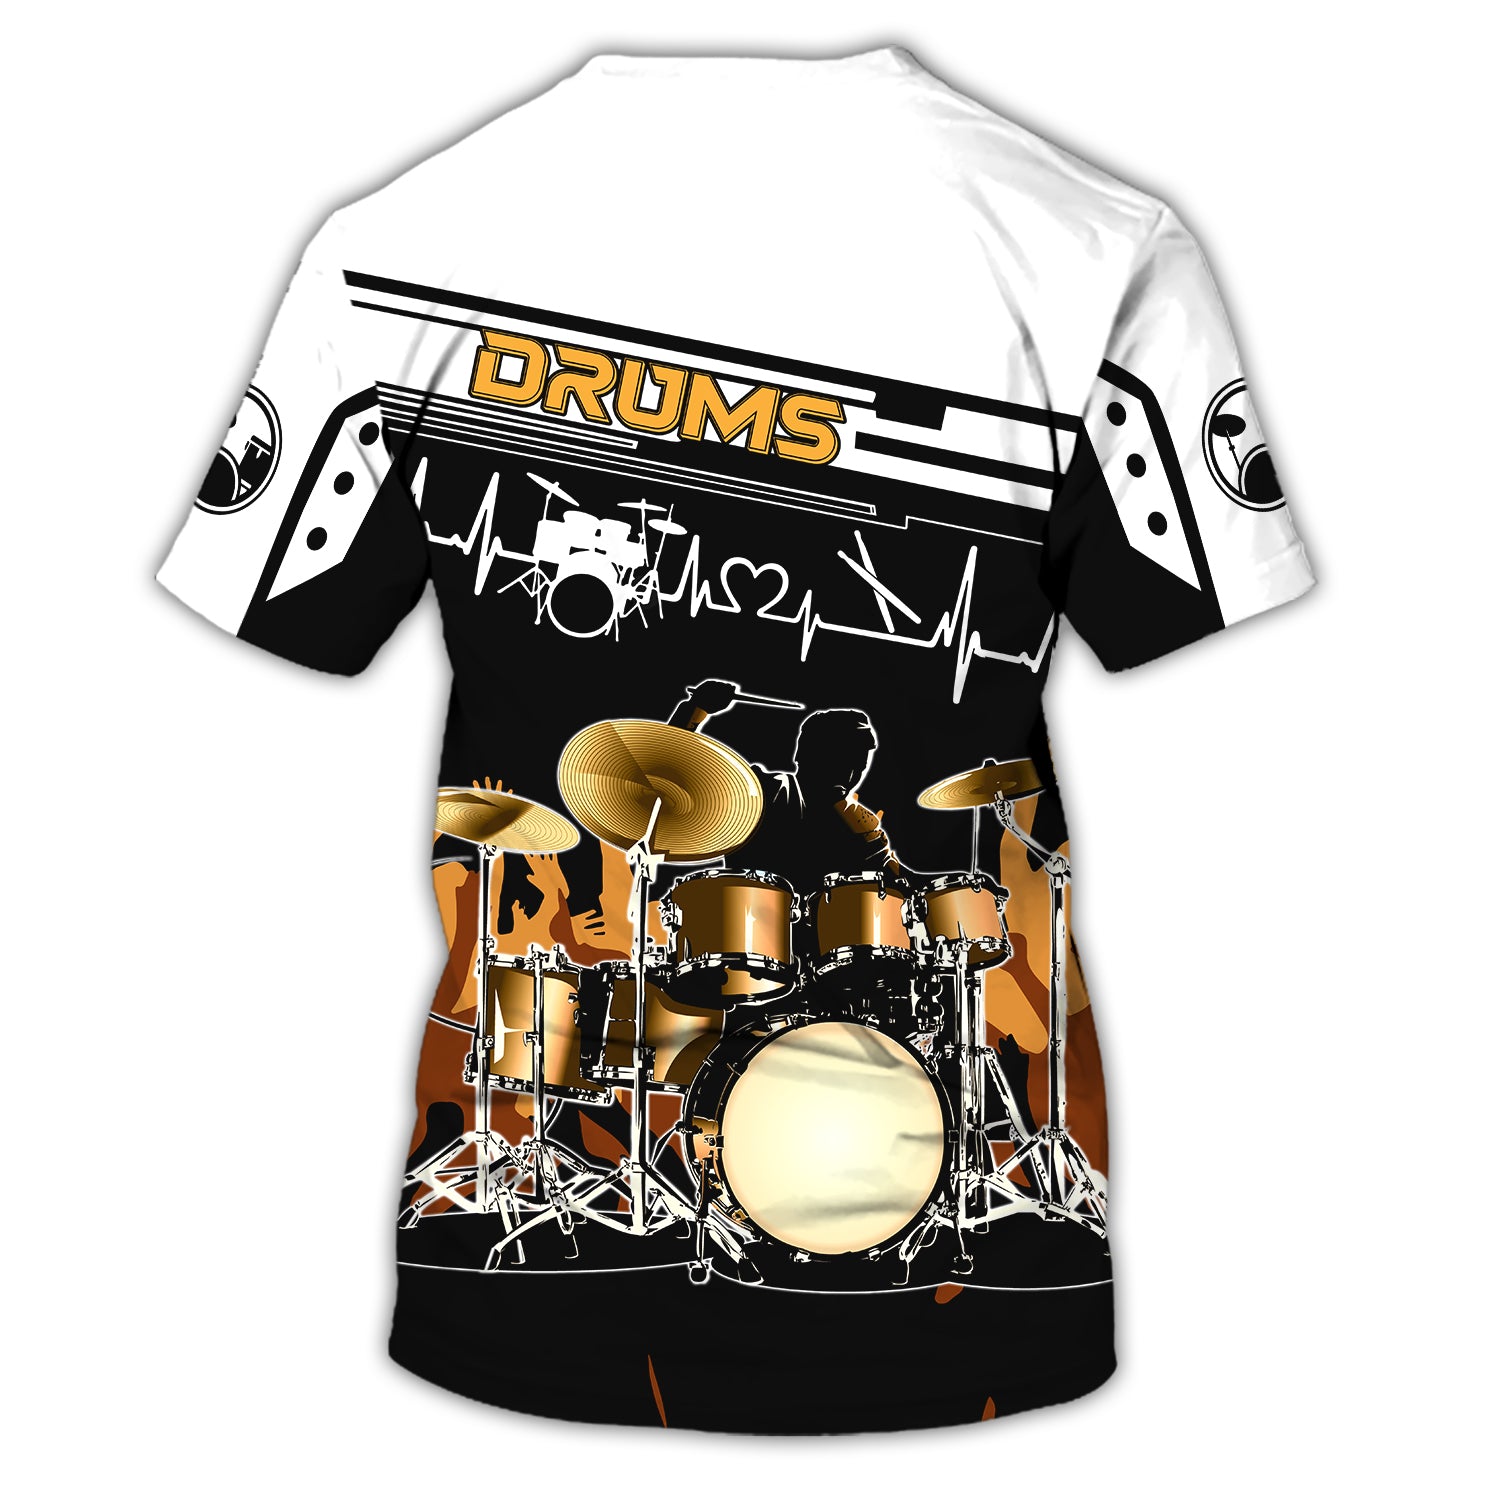 Drums, Drummer, Personalized Name 3D Tshirt 10, RINC98